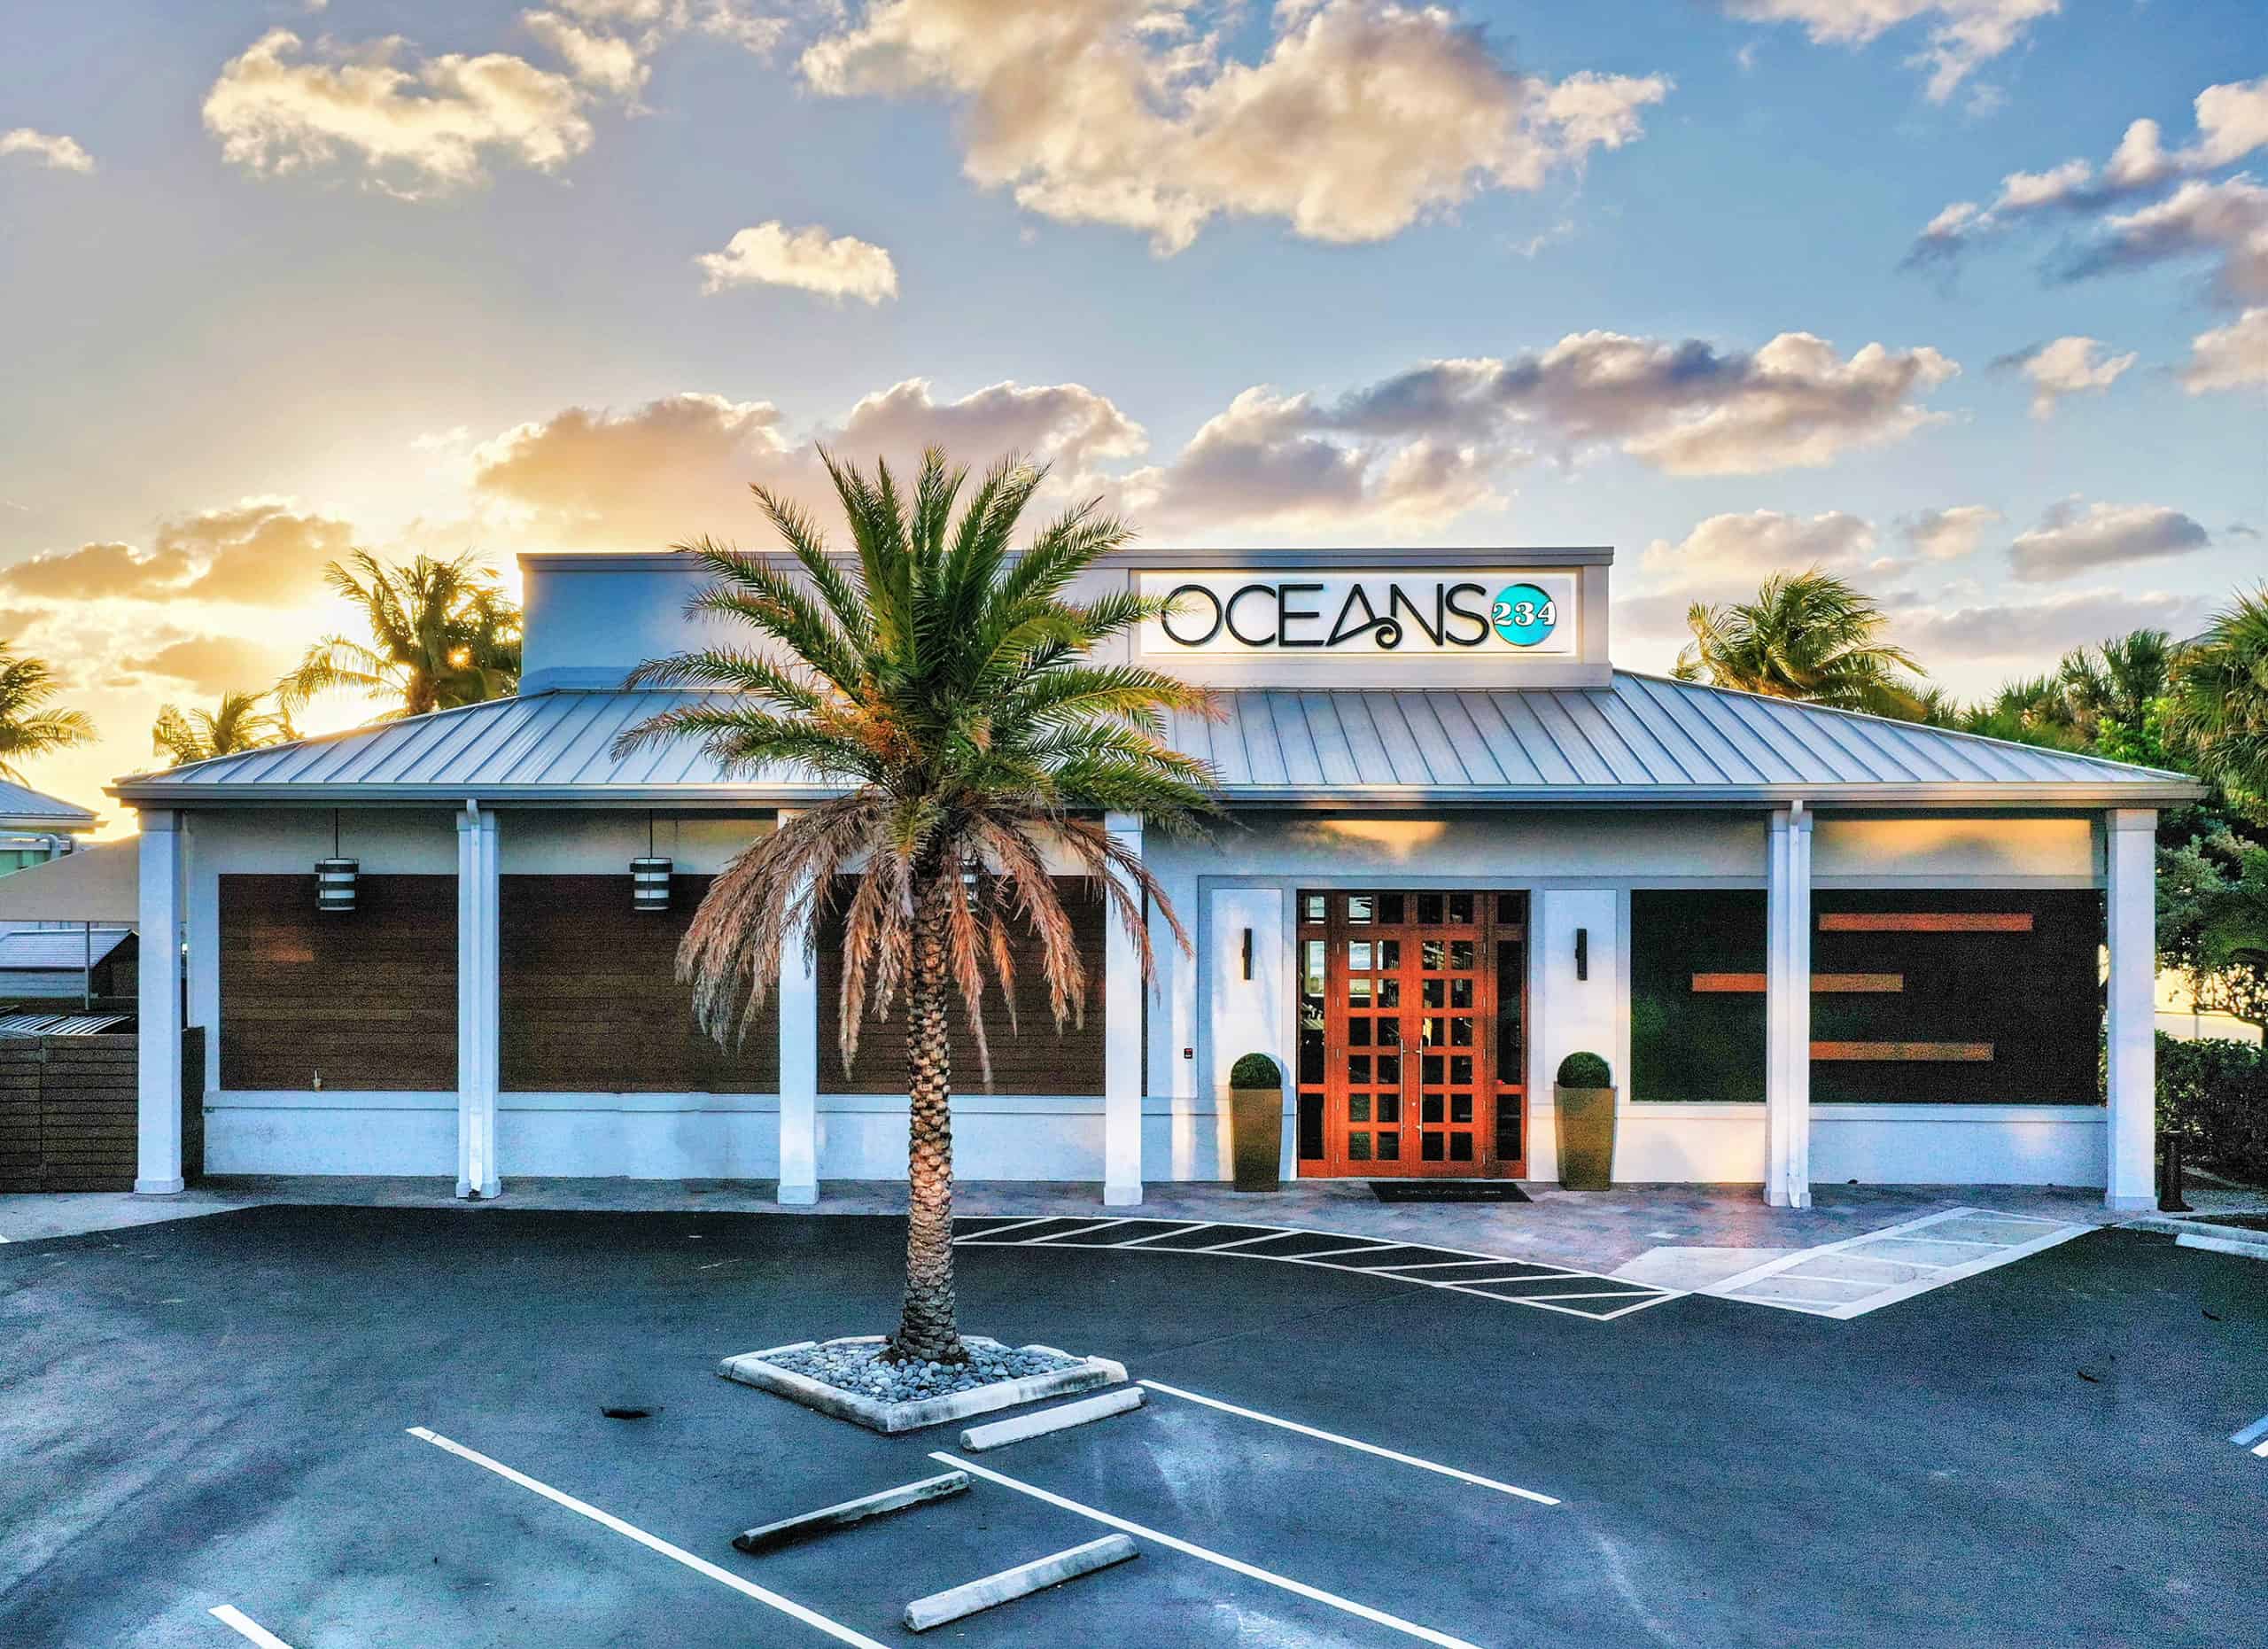 Best things to do in Boca Raton Florida - Jason Hill - Oceans234 exterior courtesy of Oceans234